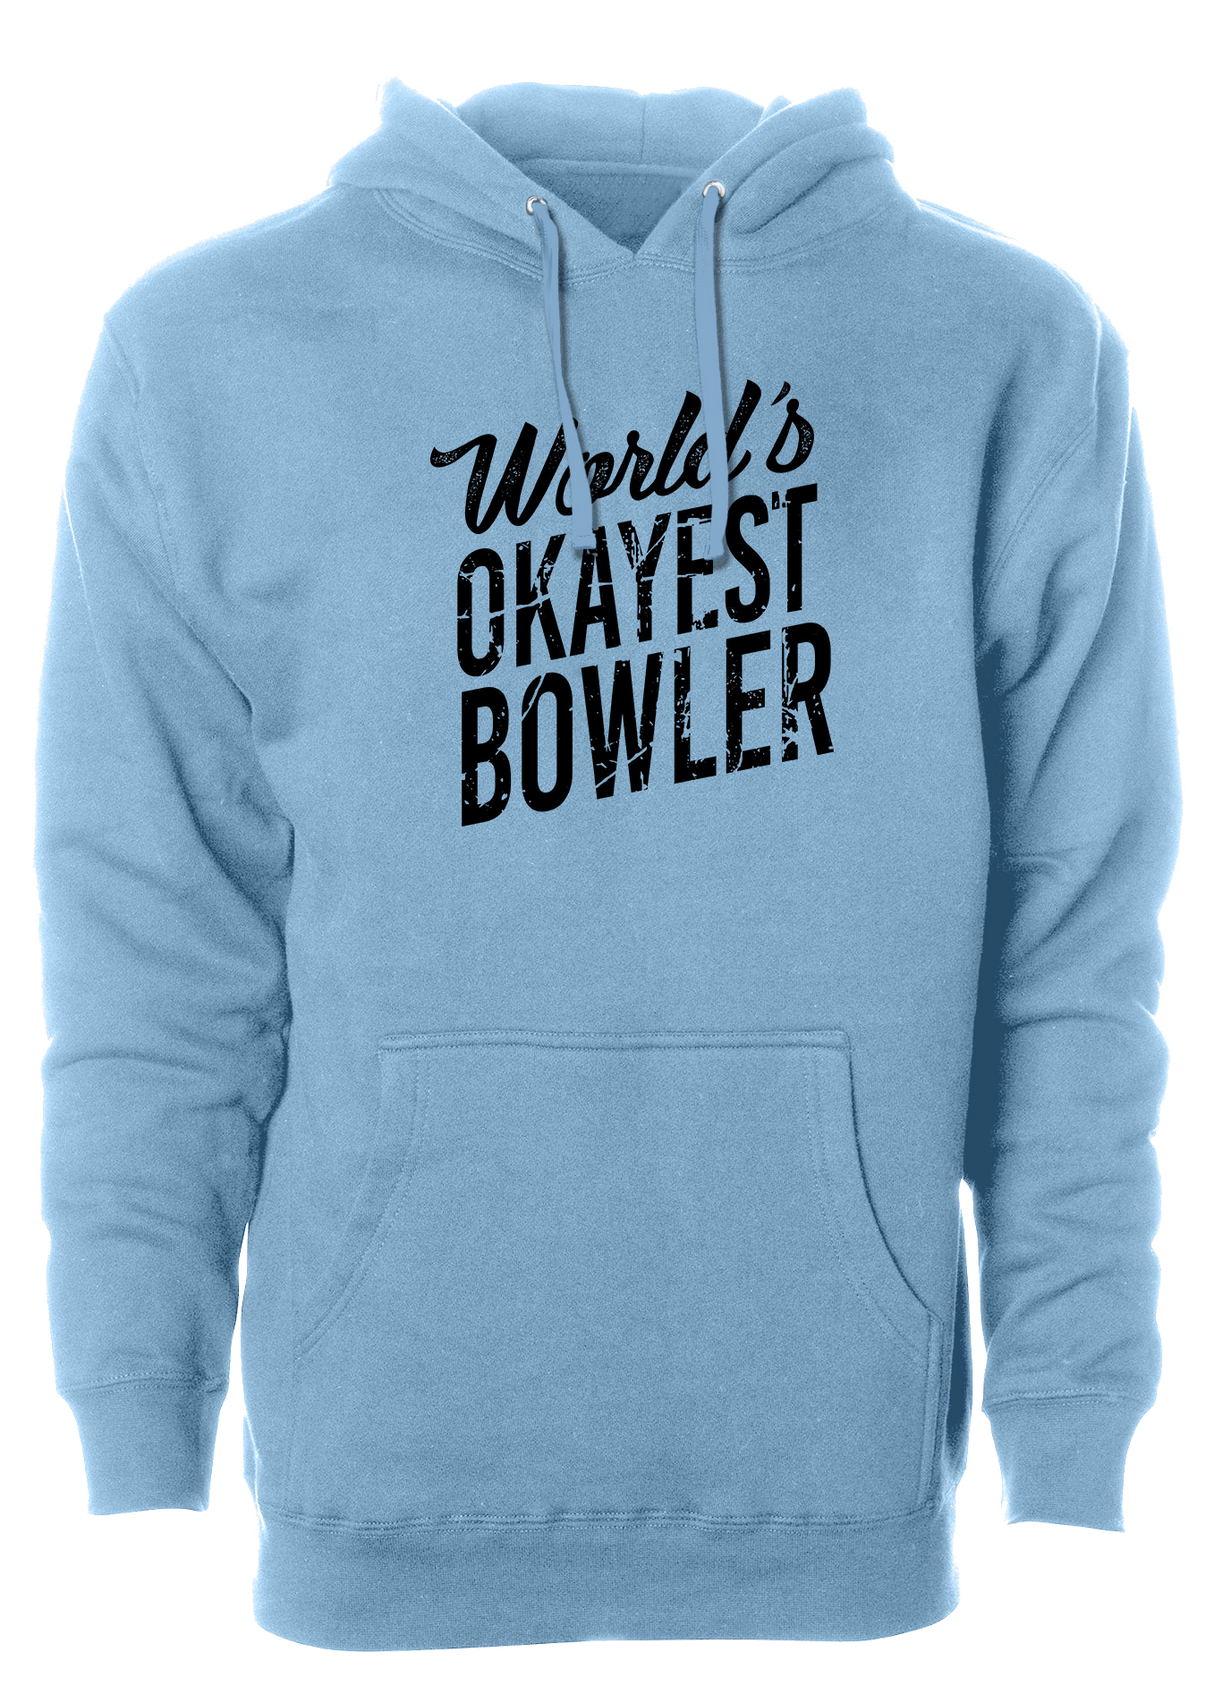 Get your humor on with this fun tee. Hit the lanes and letting everyone know your skills before you even throw a shot...or does it?!  Bowling, Tshirt, gift, funny, free, novelty, golf, shirt, tshirt, tee, shirt, pba, pwba, pro bowling, league bowling, league night, strike, spare, gutter, 